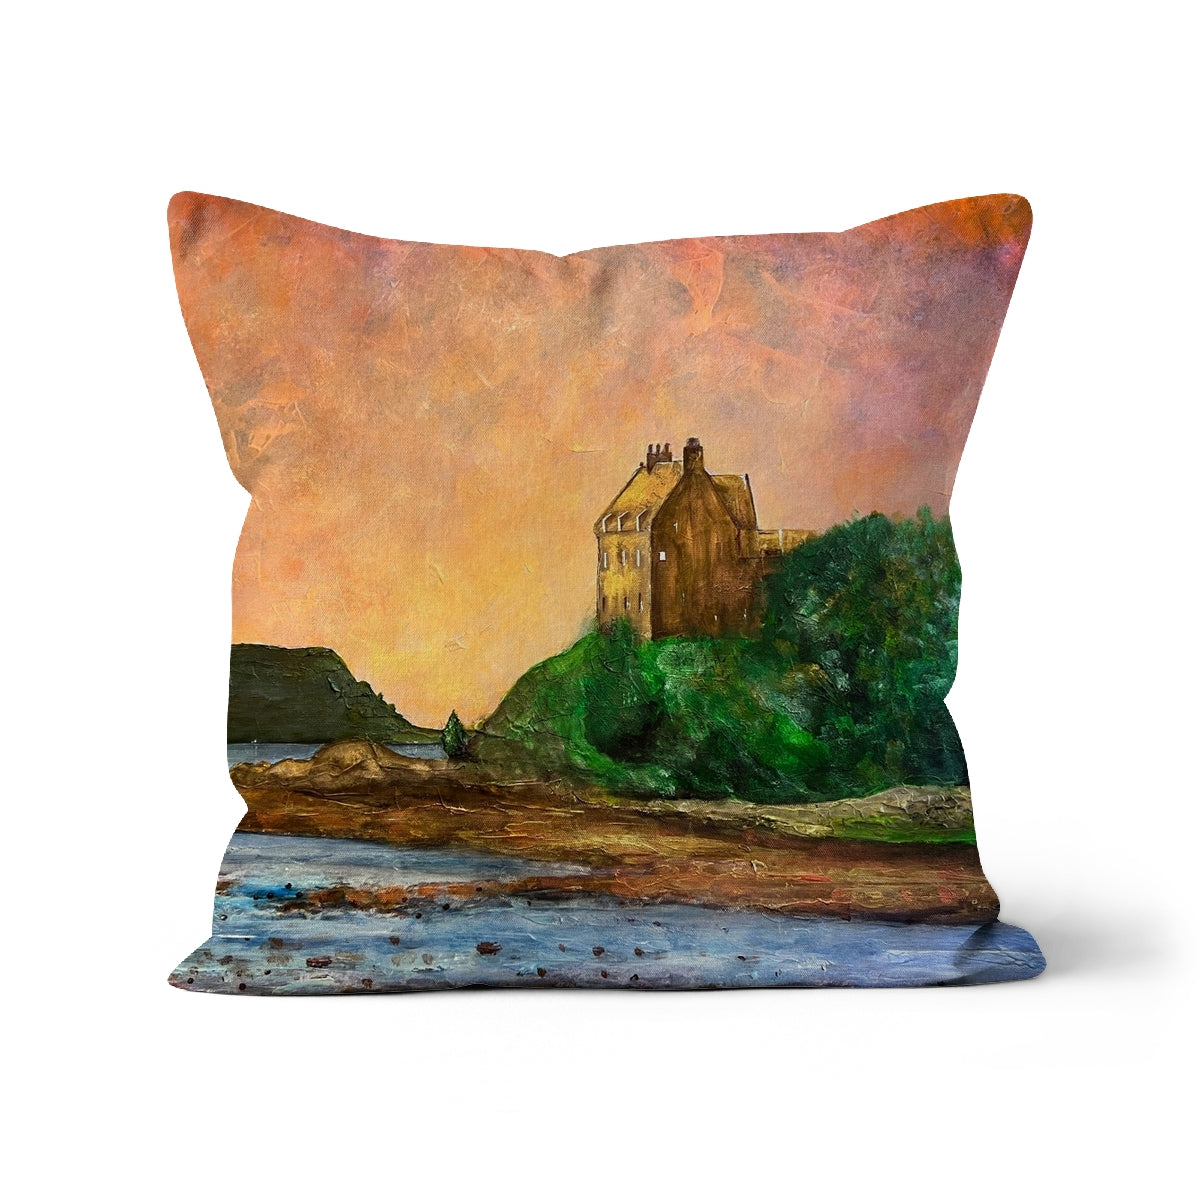 Duntrune Castle Art Gifts Cushion-Cushions-Historic & Iconic Scotland Art Gallery-Faux Suede-18"x18"-Paintings, Prints, Homeware, Art Gifts From Scotland By Scottish Artist Kevin Hunter